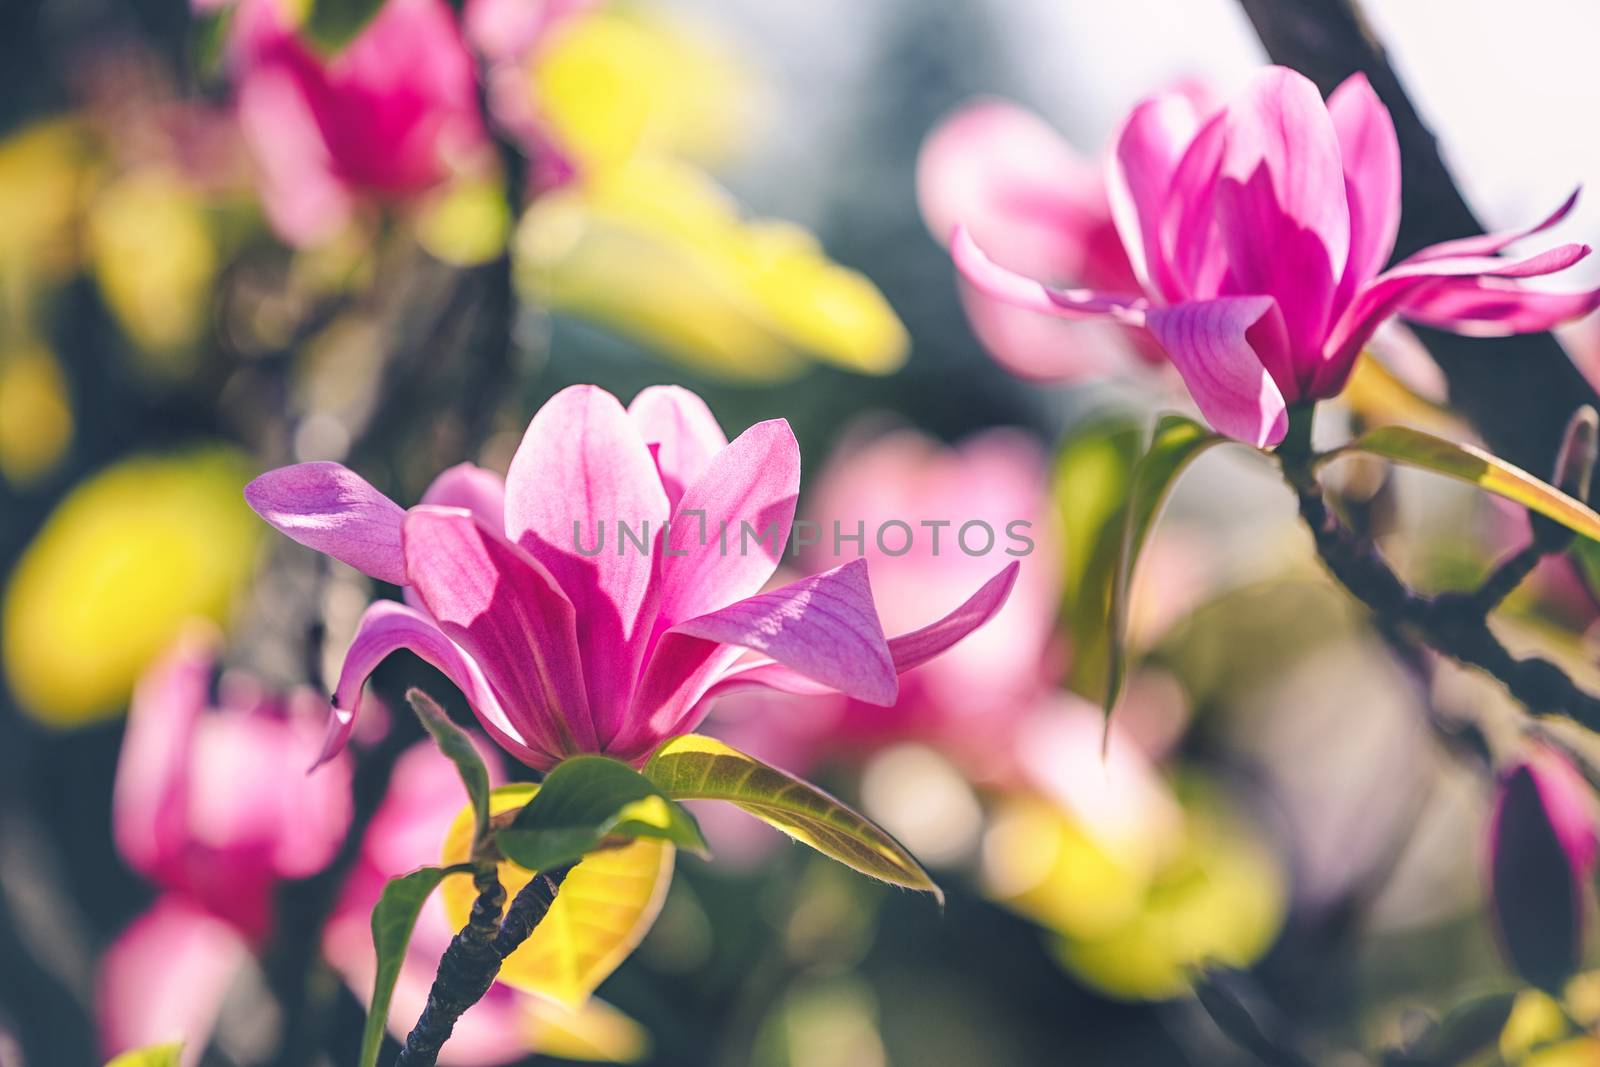 opening magnolia flower in the park at springtime on the dark background with a shallow DOF